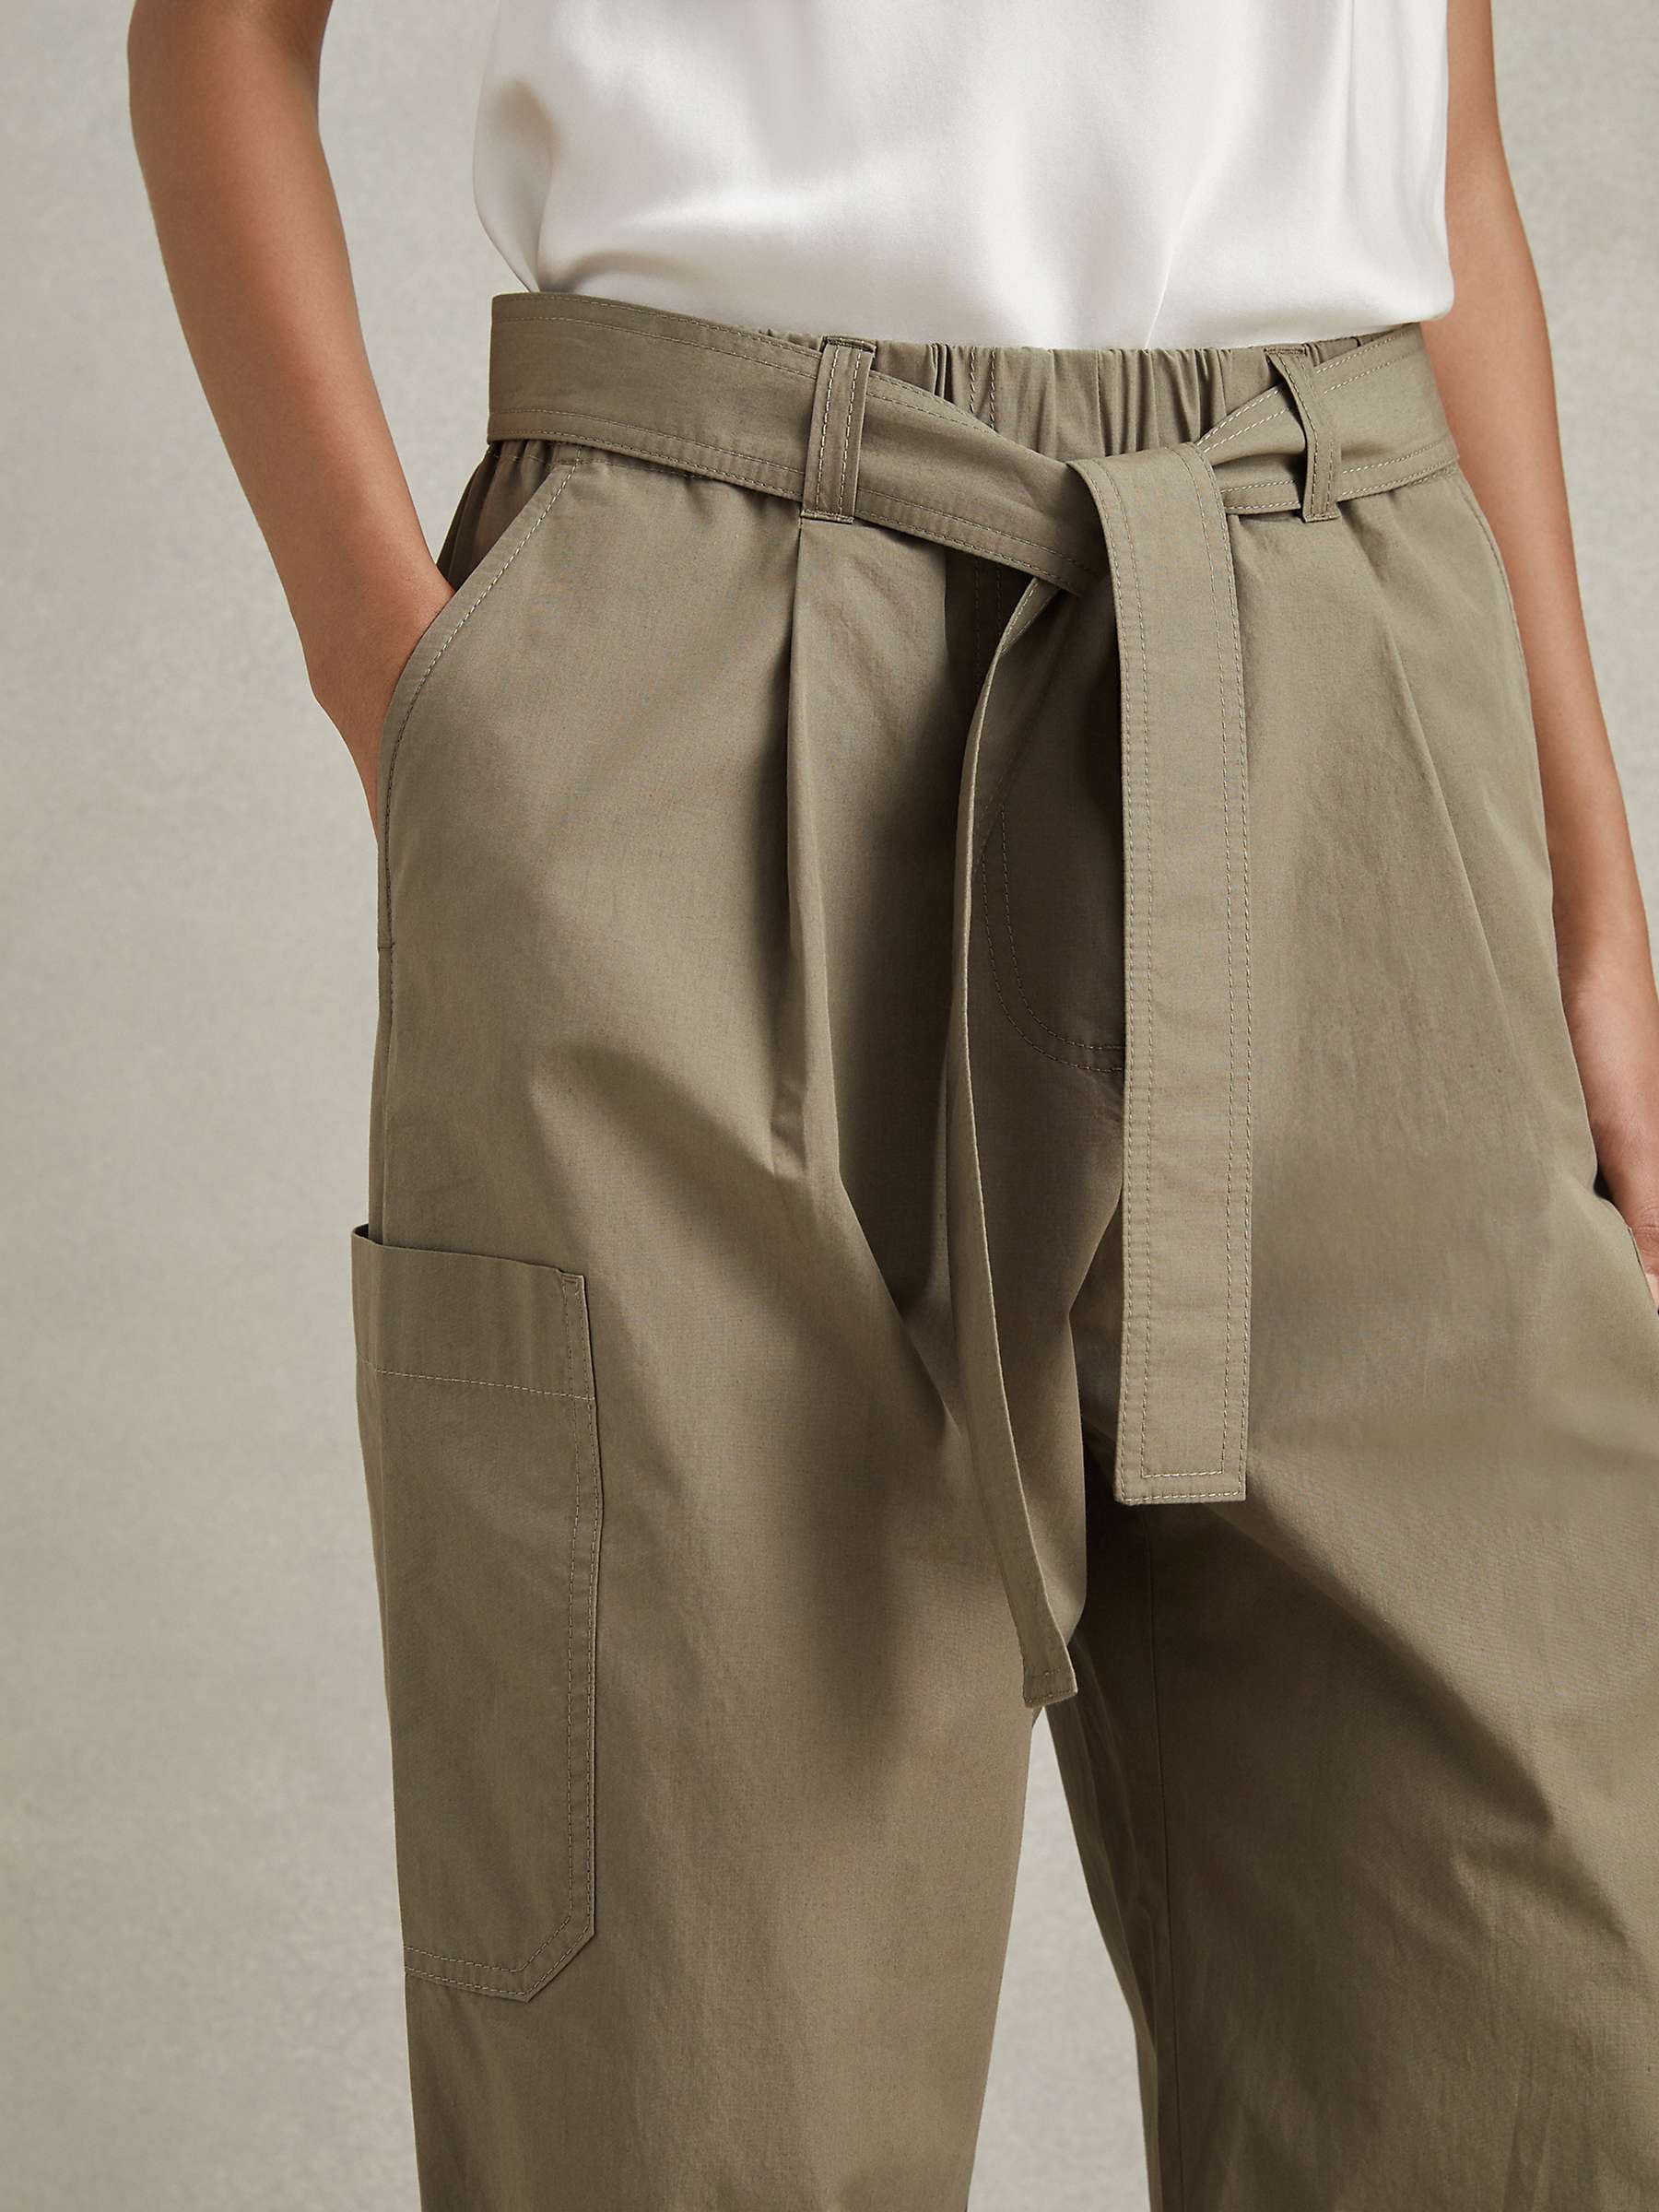 Buy Reiss Delia Tapered Parachute Cargo Trousers Online at johnlewis.com